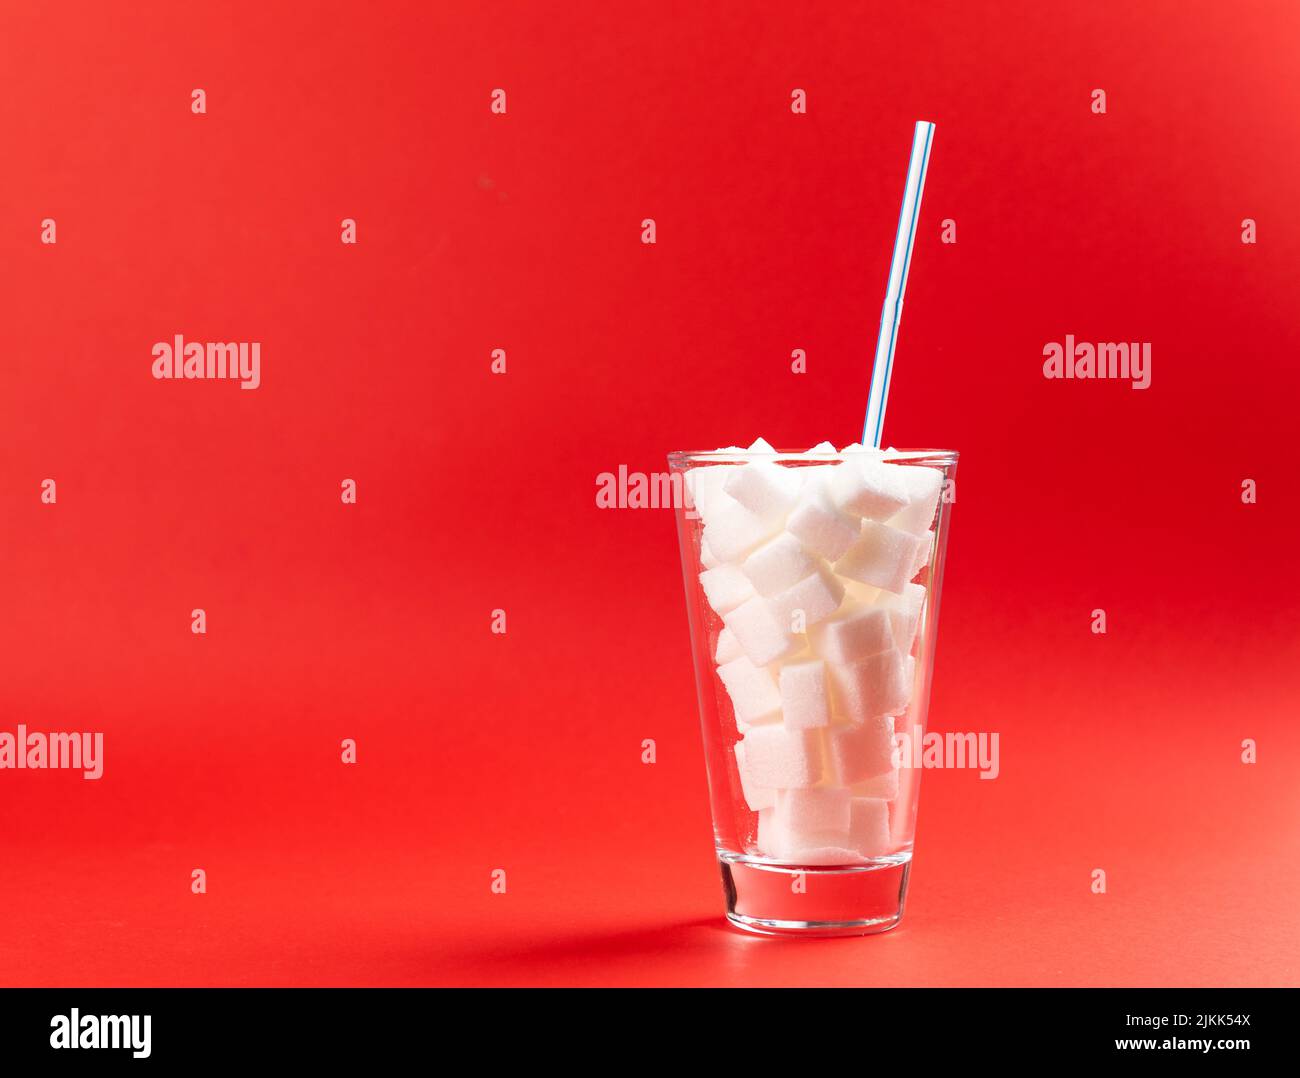 glass with sugar cubes and drinking straw on a red background Stock Photo